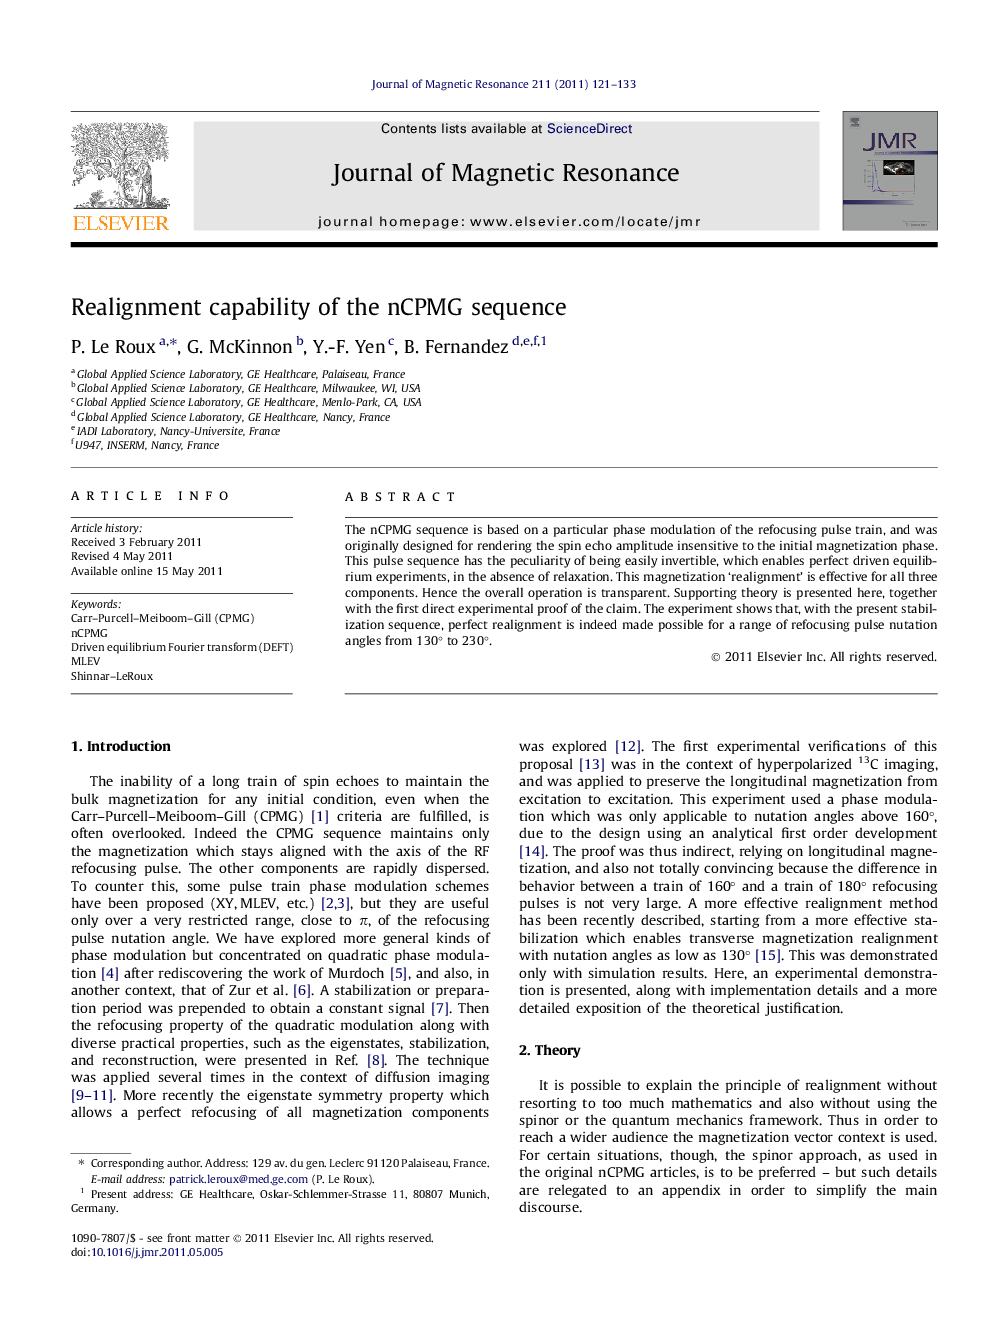 Realignment capability of the nCPMG sequence